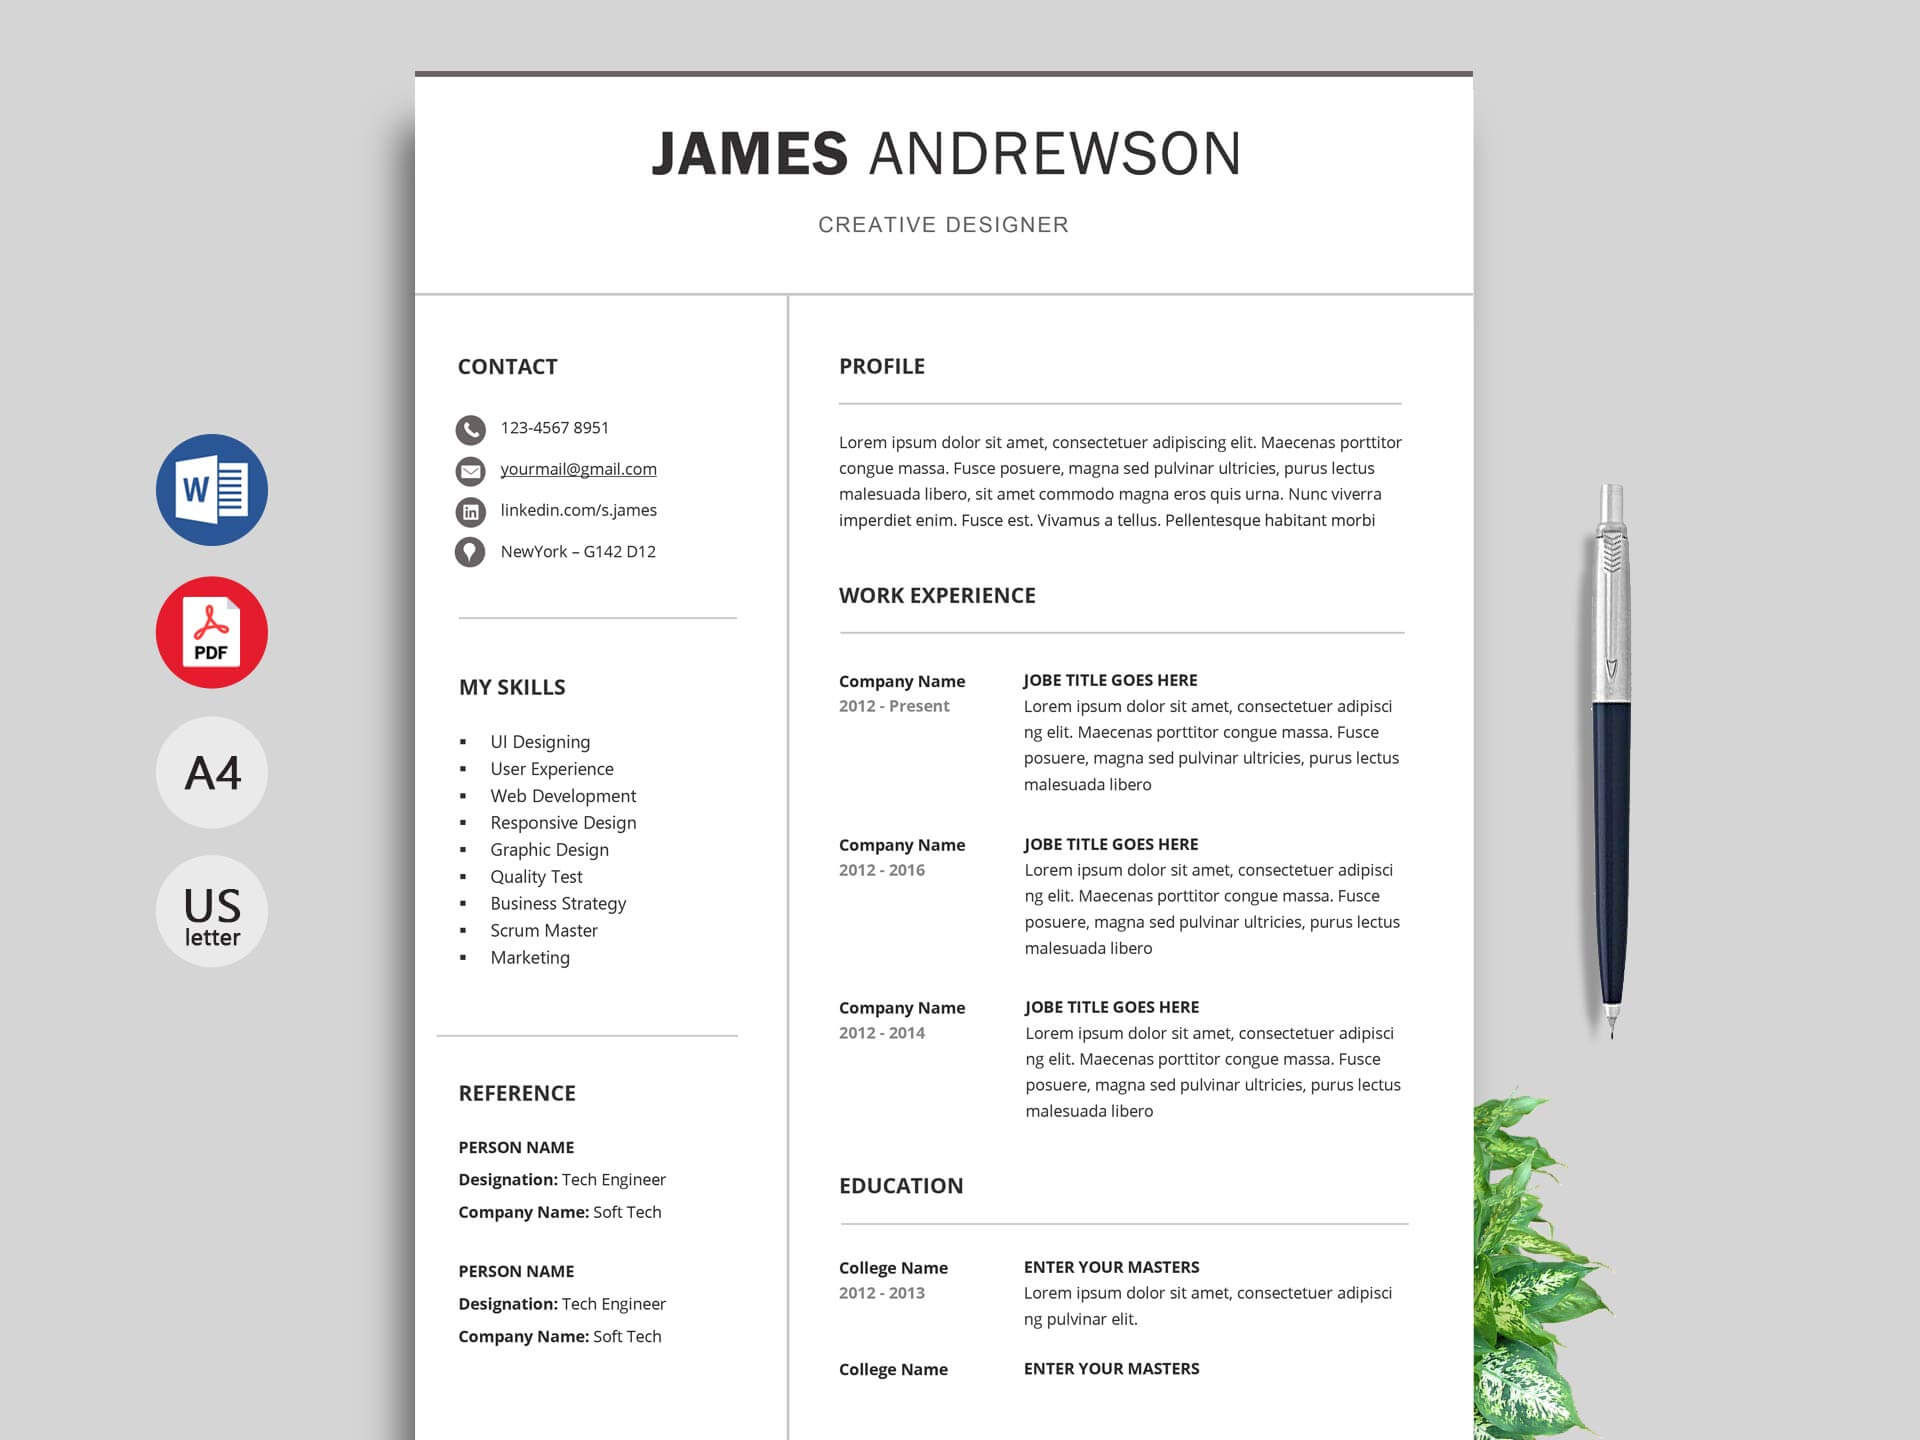 Resume : Coloring Microsoft Word Free Resume Templates Blank Regarding Free Blank Resume Templates For Microsoft Word